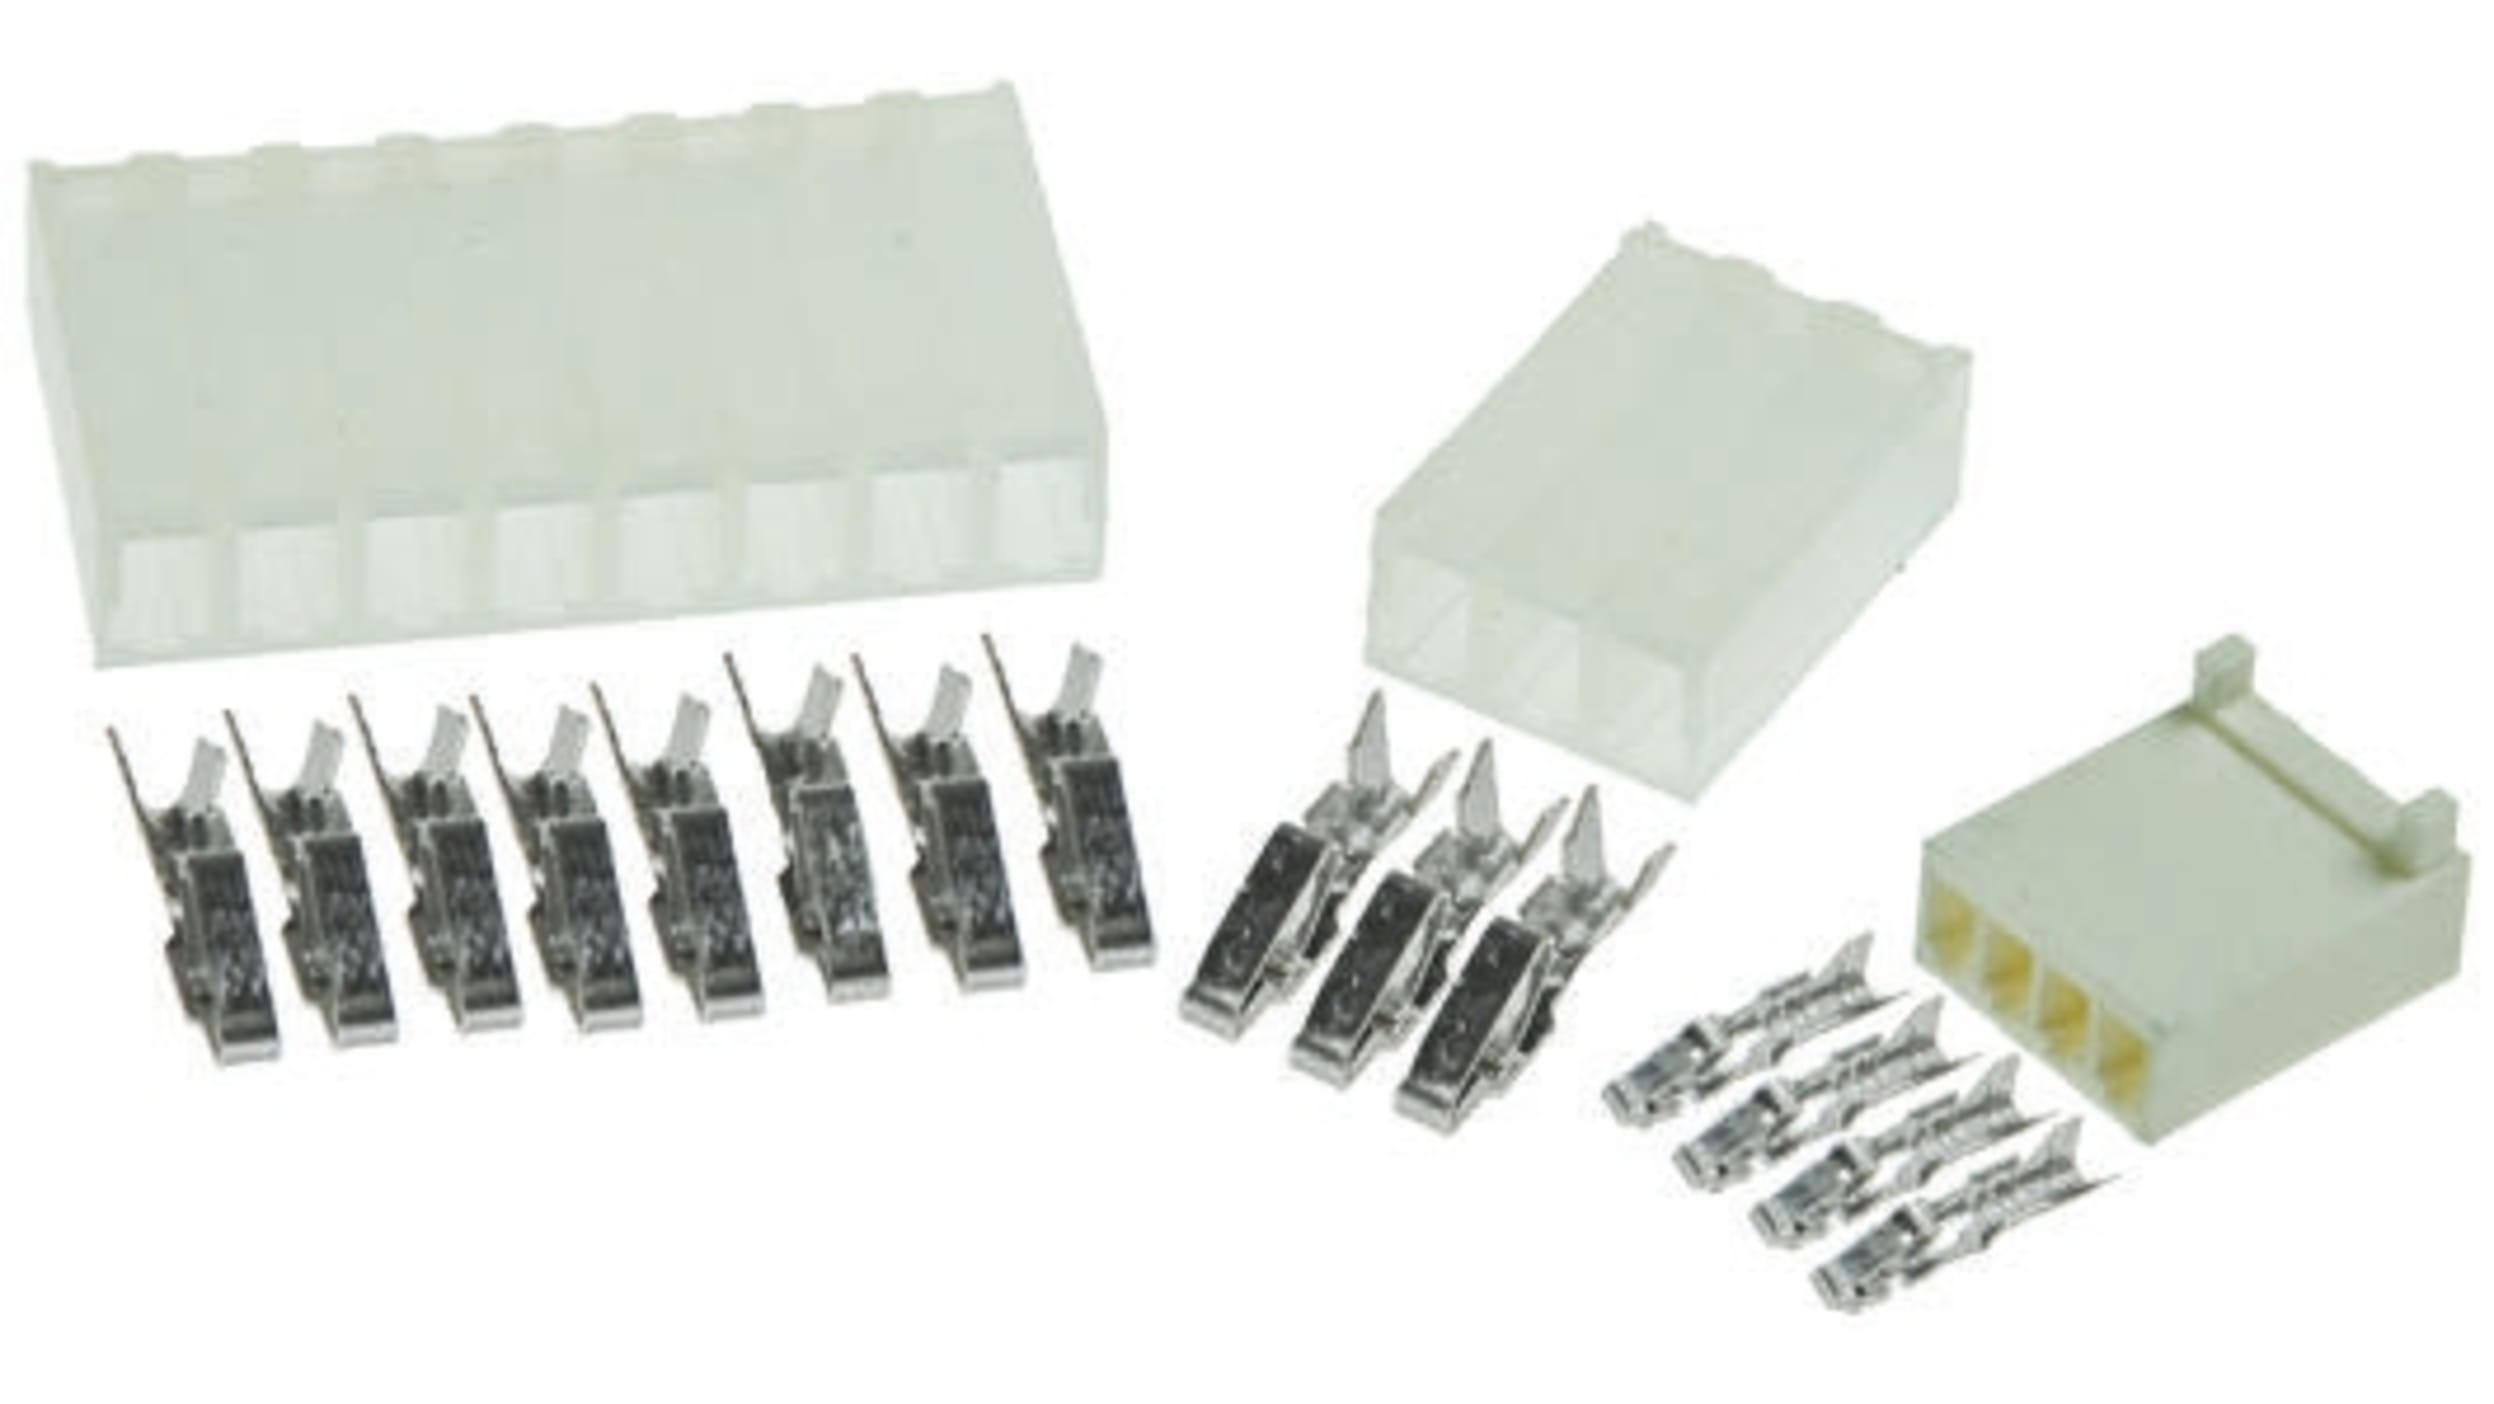 Molex Connector Kit, for use with ECO-160